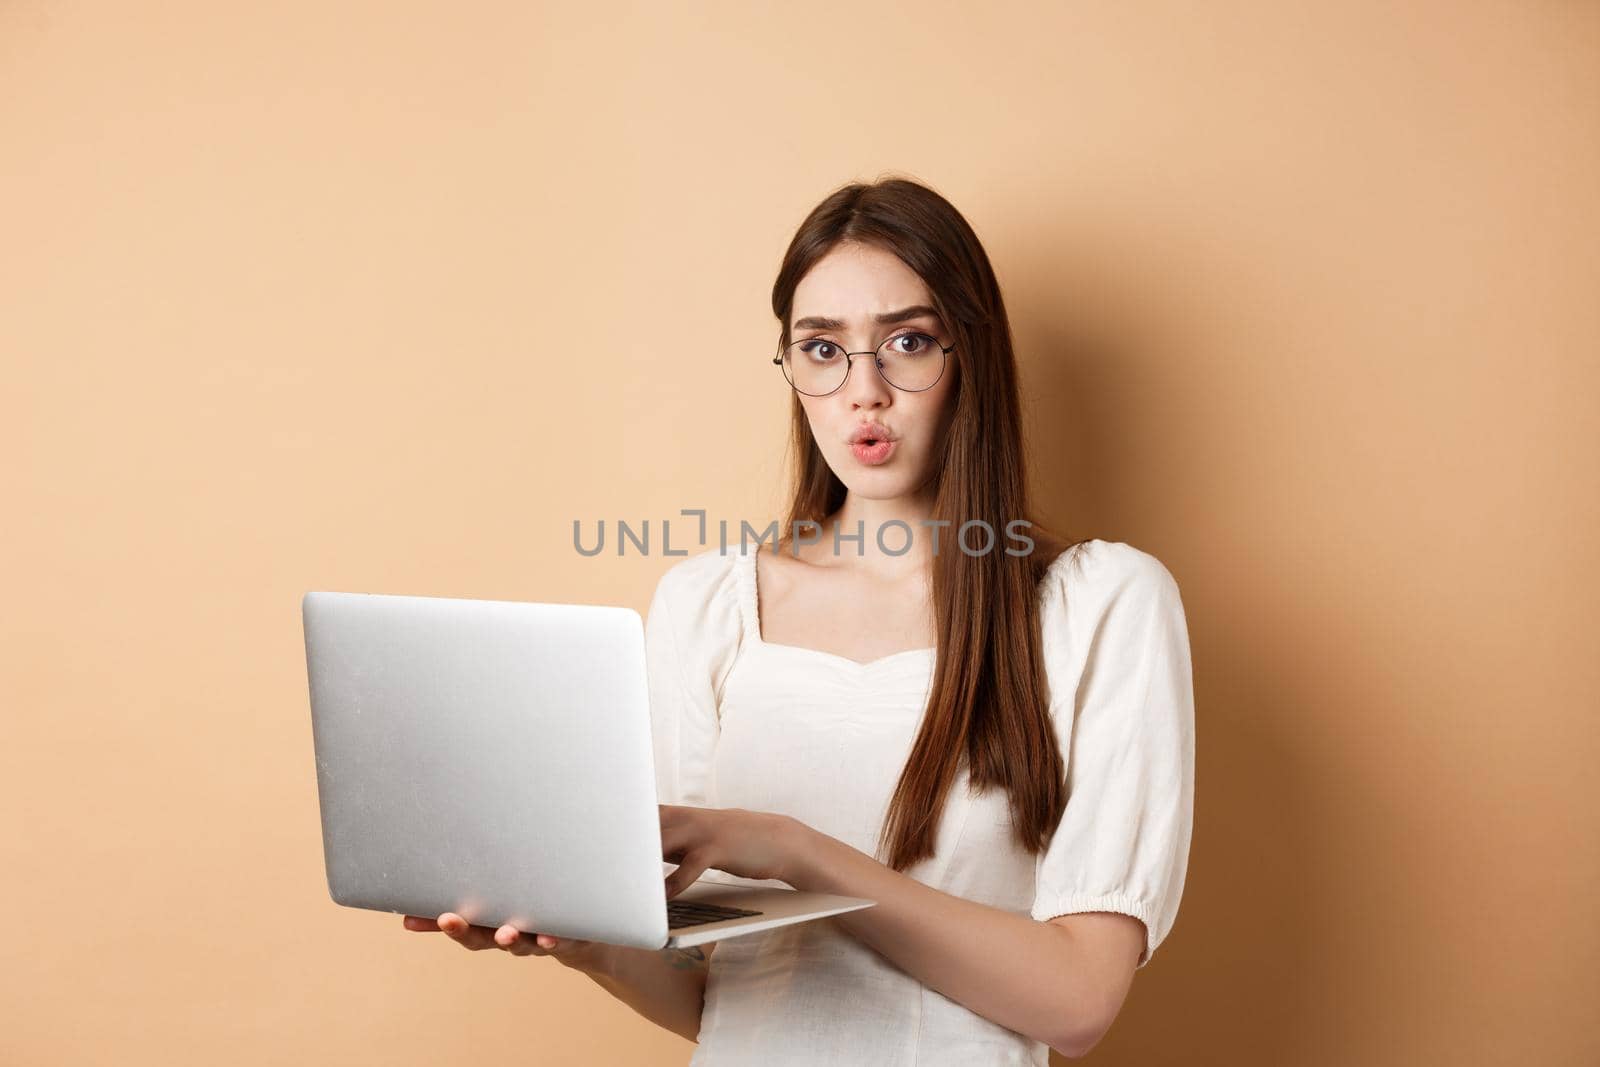 Concerned girl in glasses look at camera confused, working on laptop, having trouble with computer, standing on beige background.